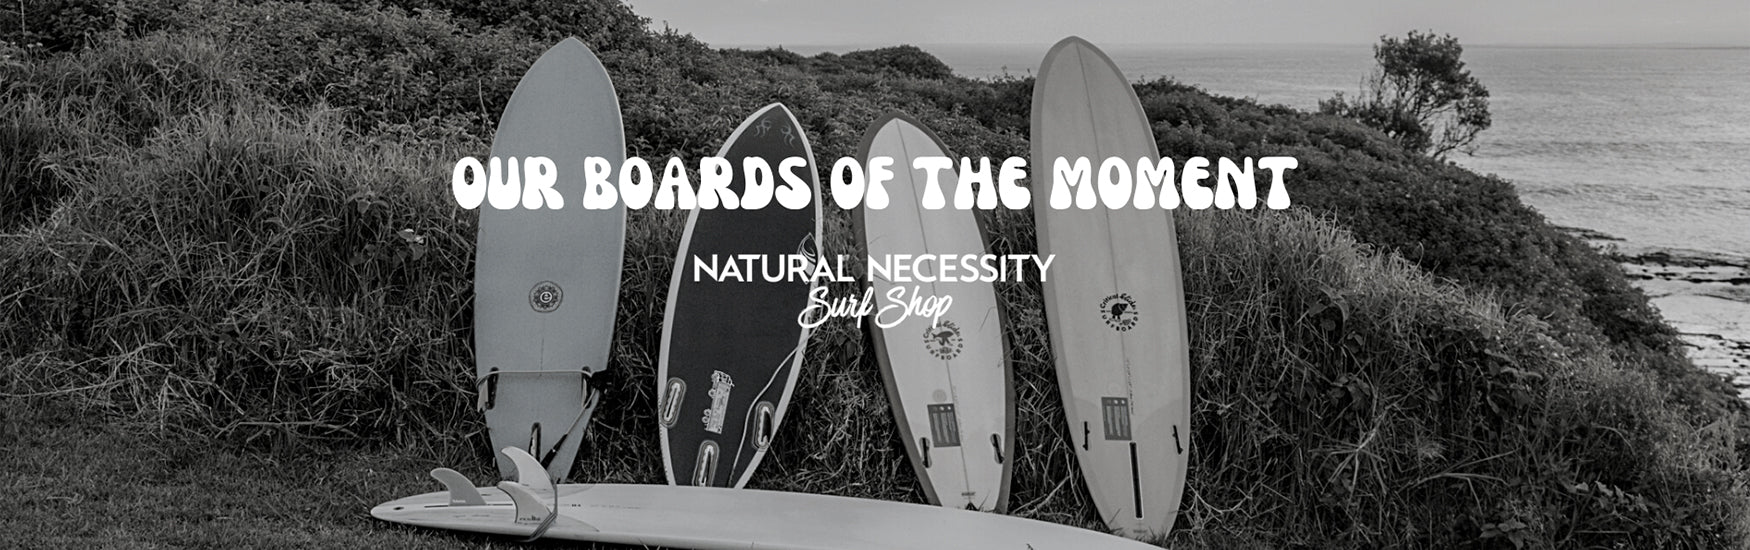 Our Boards of the Moment